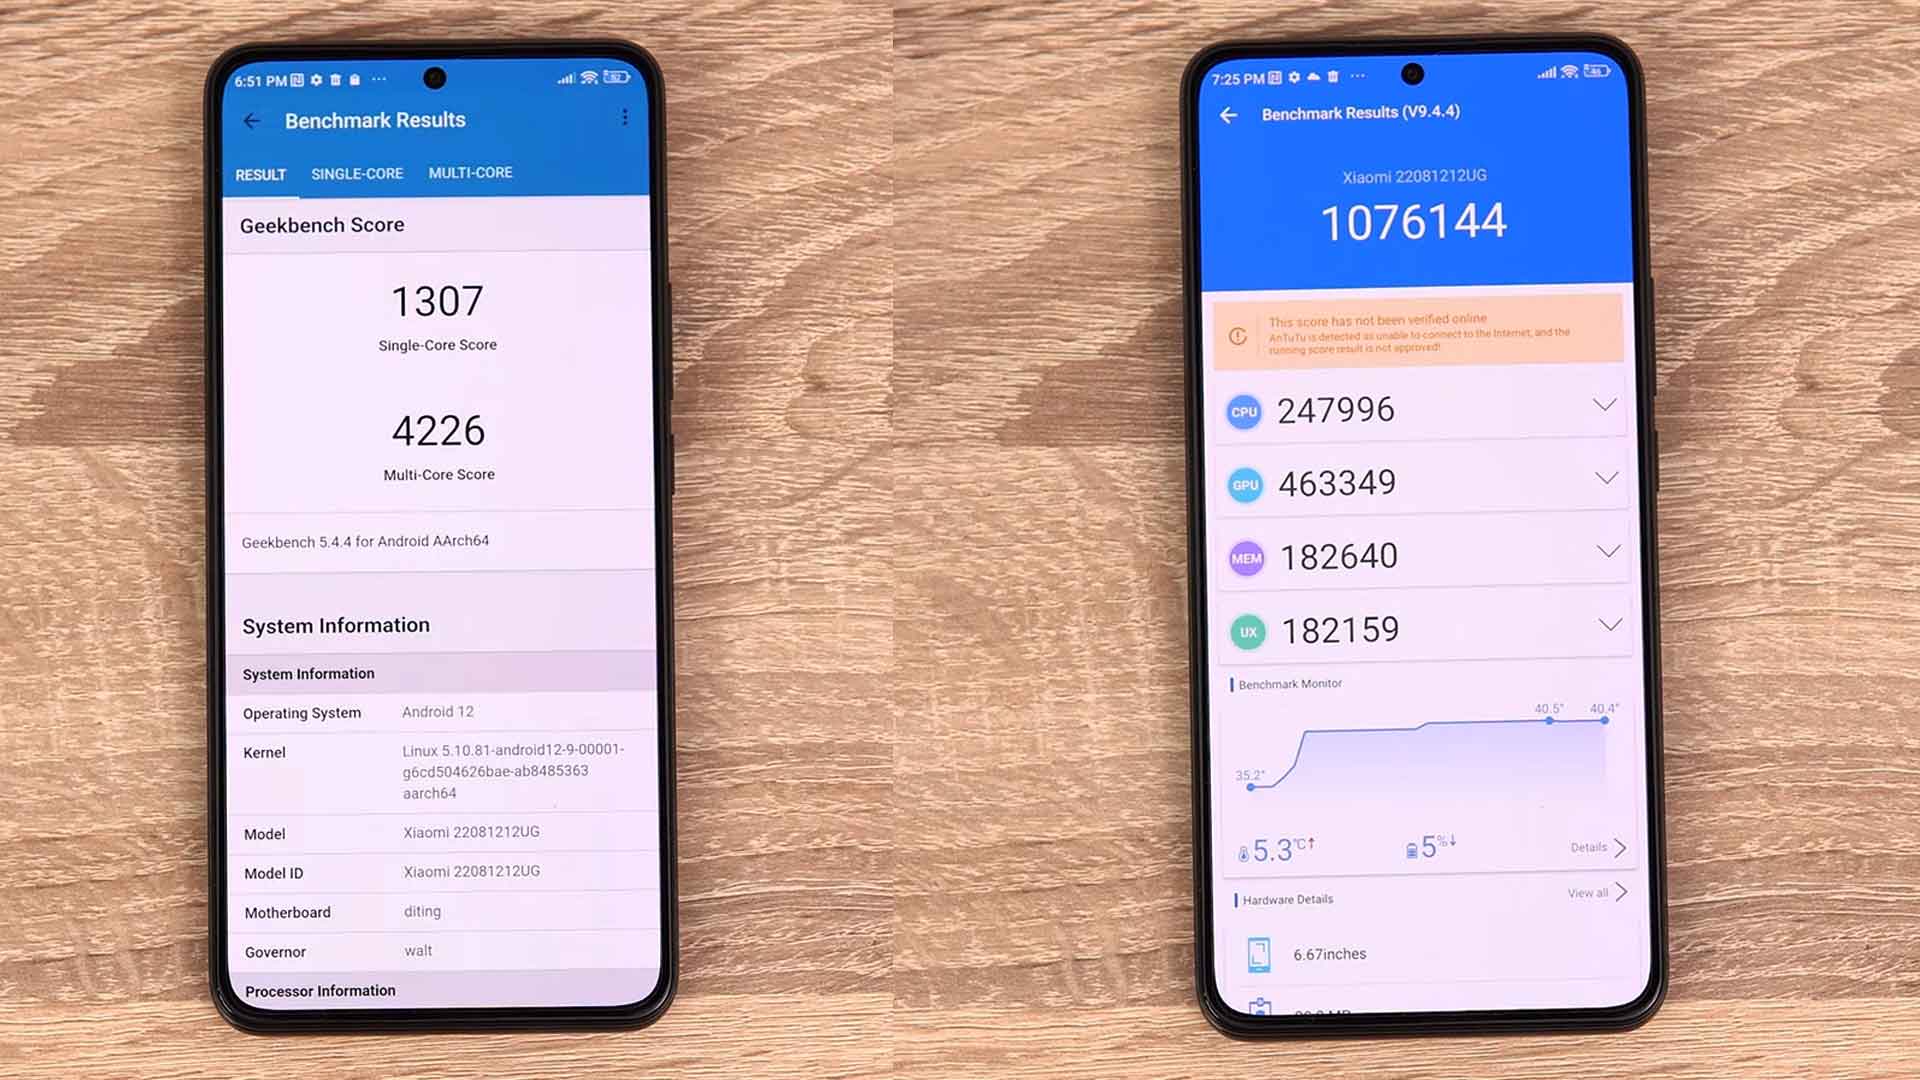 The Geekbench 5 score is 1307 for Single-Core and 4226 for Multi-Core. You can run this on your phone to compare. Also, the Snapdragon 8+ Gen 1 chipset gets over a million points on AnTuTu version 9.4. It does say that it's not a validated score online. I don't know why that's happening. It's a bit of a glitch. You can see it did get a little hot and lost five percent of battery just from that single test. I tried to run a 3D mark stress test that goes for 20 minutes, and it would not complete. It failed at about 10. I think it was 12 minutes when it got overheated. Not good to see this. So, 12T Pro does need to throttle this hot Snapdragon 8 Plus Gen 1 chip a little bit more.